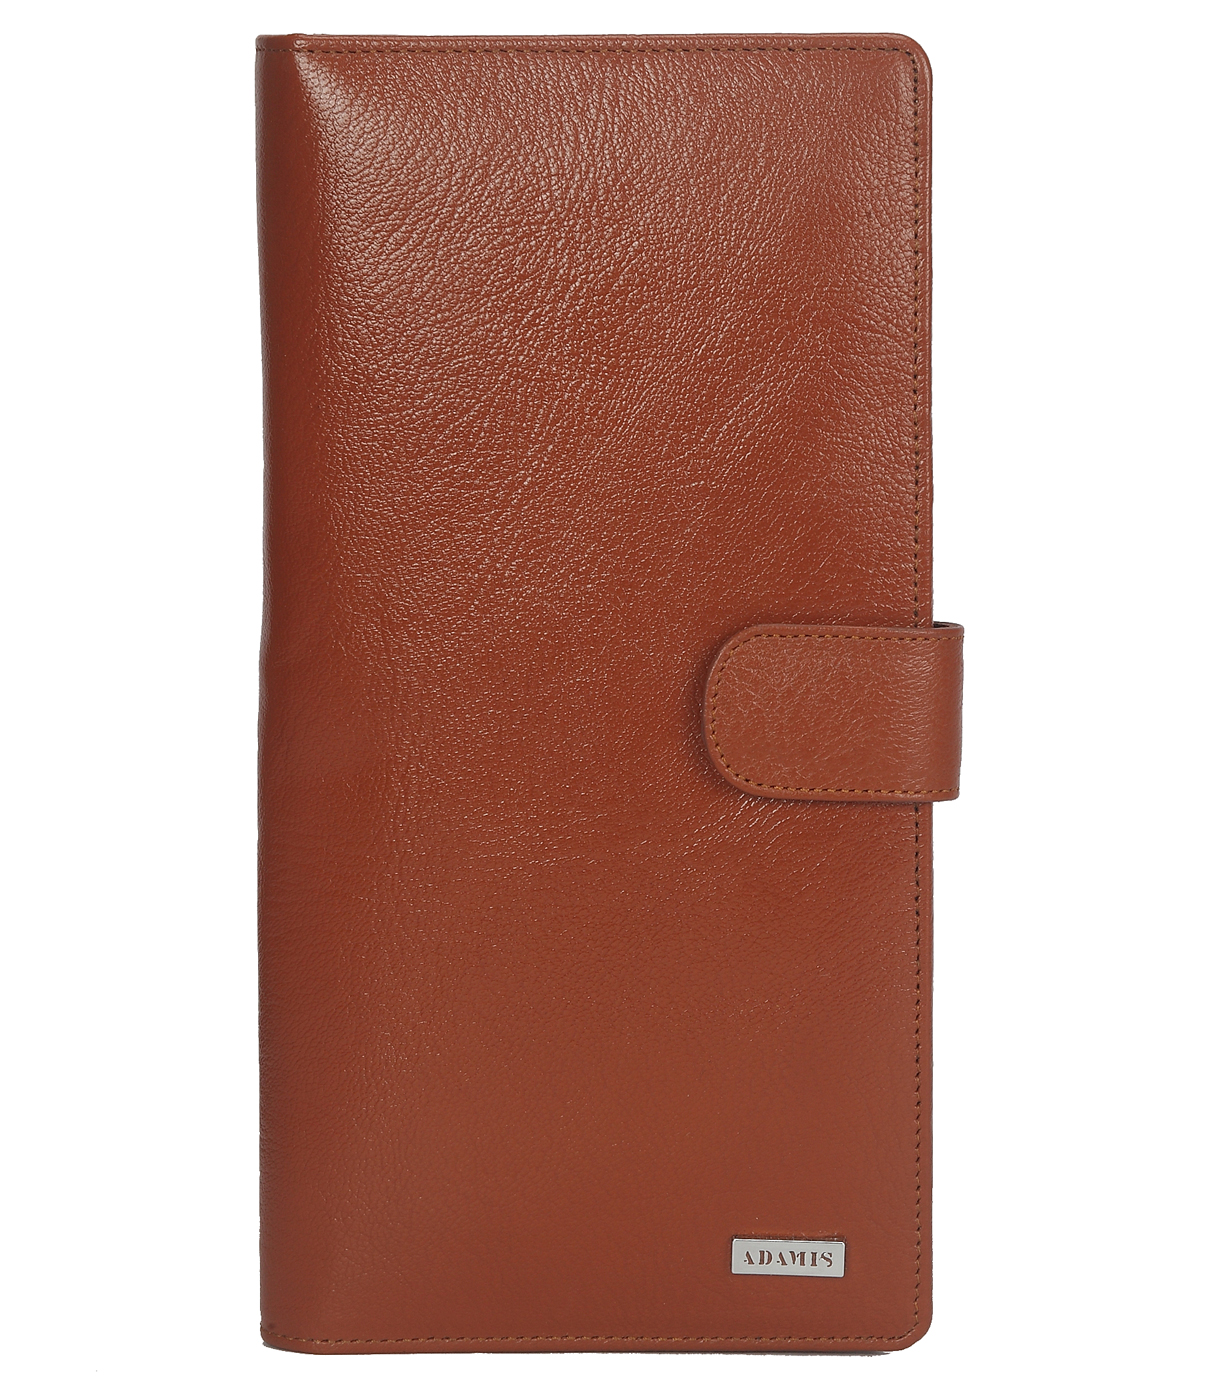 W247-Cynthia-Unisex wallet for travel documents in Genuine Leather - Tan